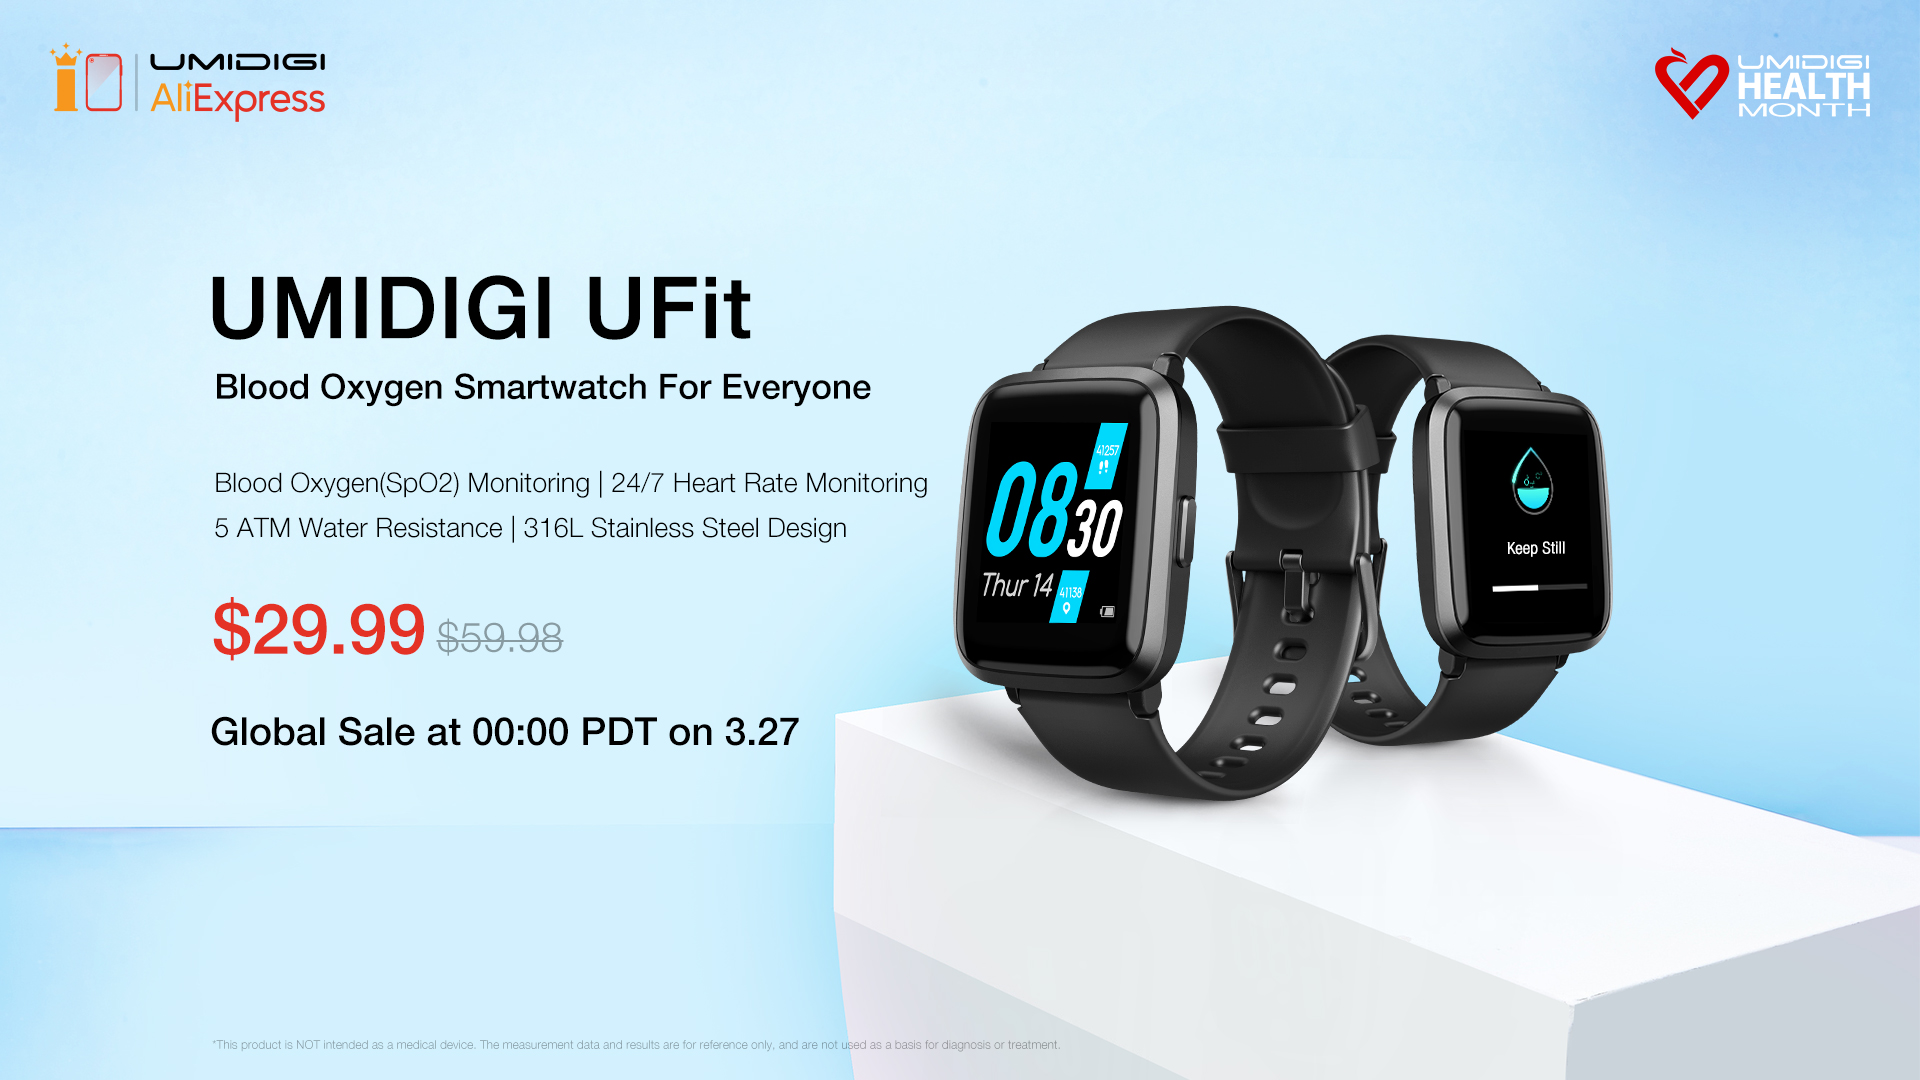 UMIDIGI on X: Introducing #UmidgiUFit, blood oxygen smartwatch for  everyone! #HealthForAll ✓ Blood Oxygen(SpO2) Monitoring ✓ 24/7 Heart Rate  Monitoring ✓ 5ATM Waterproof Global Sale at 00:00 PDT on 3.27 Add to